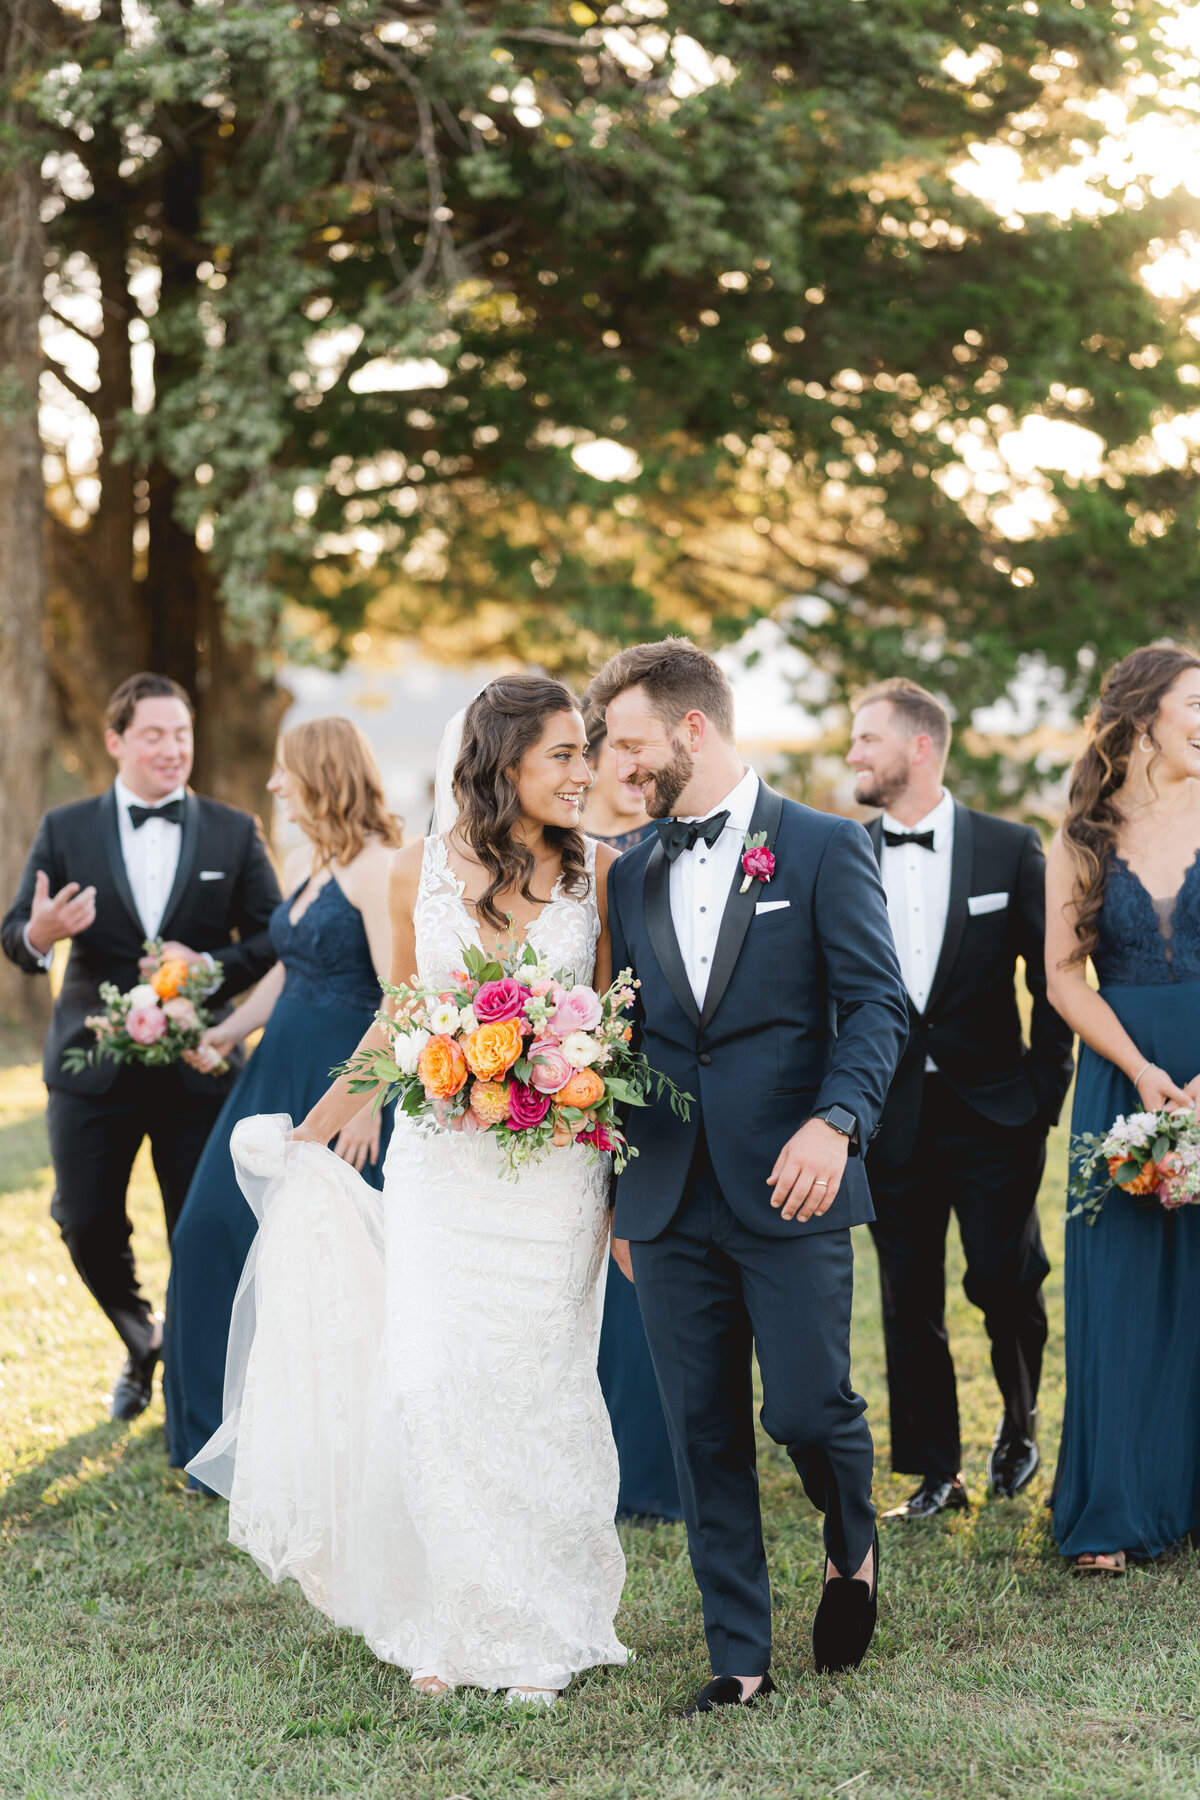 wedding couple in navy black tie with Pnina Tornei gown walking outside with wedding party behind them